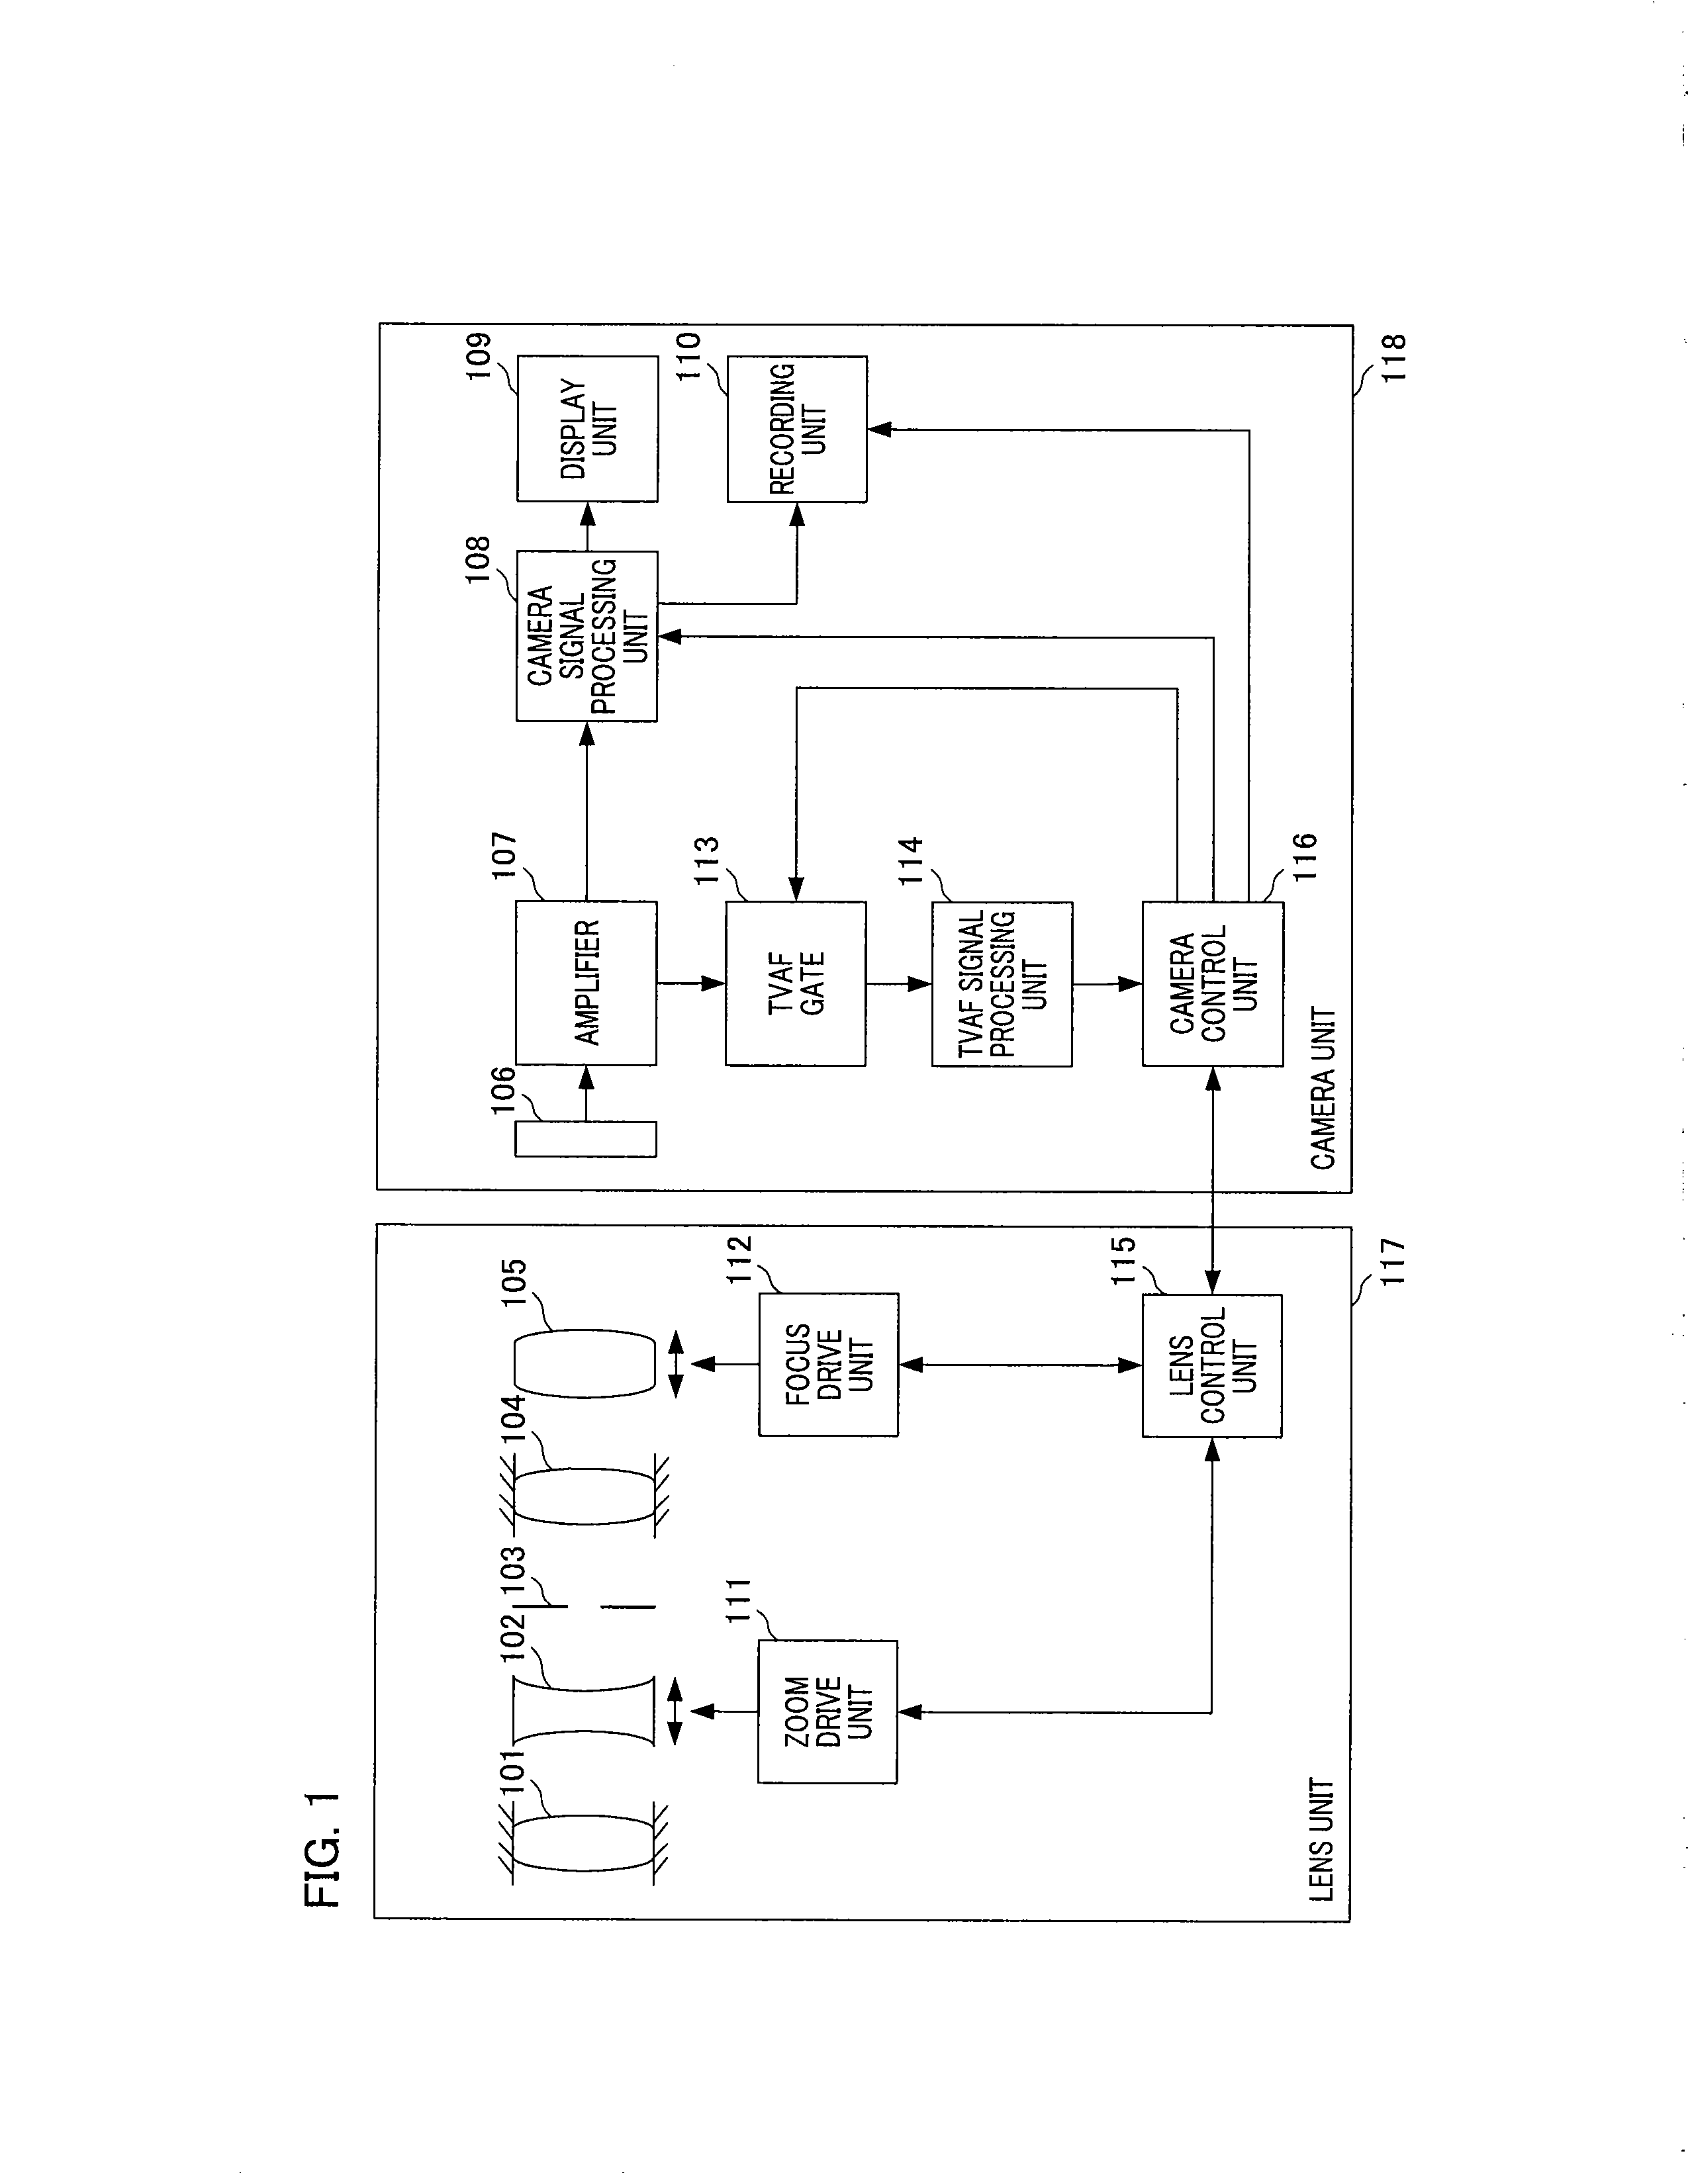 Imaging apparatus, lens apparatus, imaging apparatus controlling method, lens apparatus controlling method, computer program, and imaging system